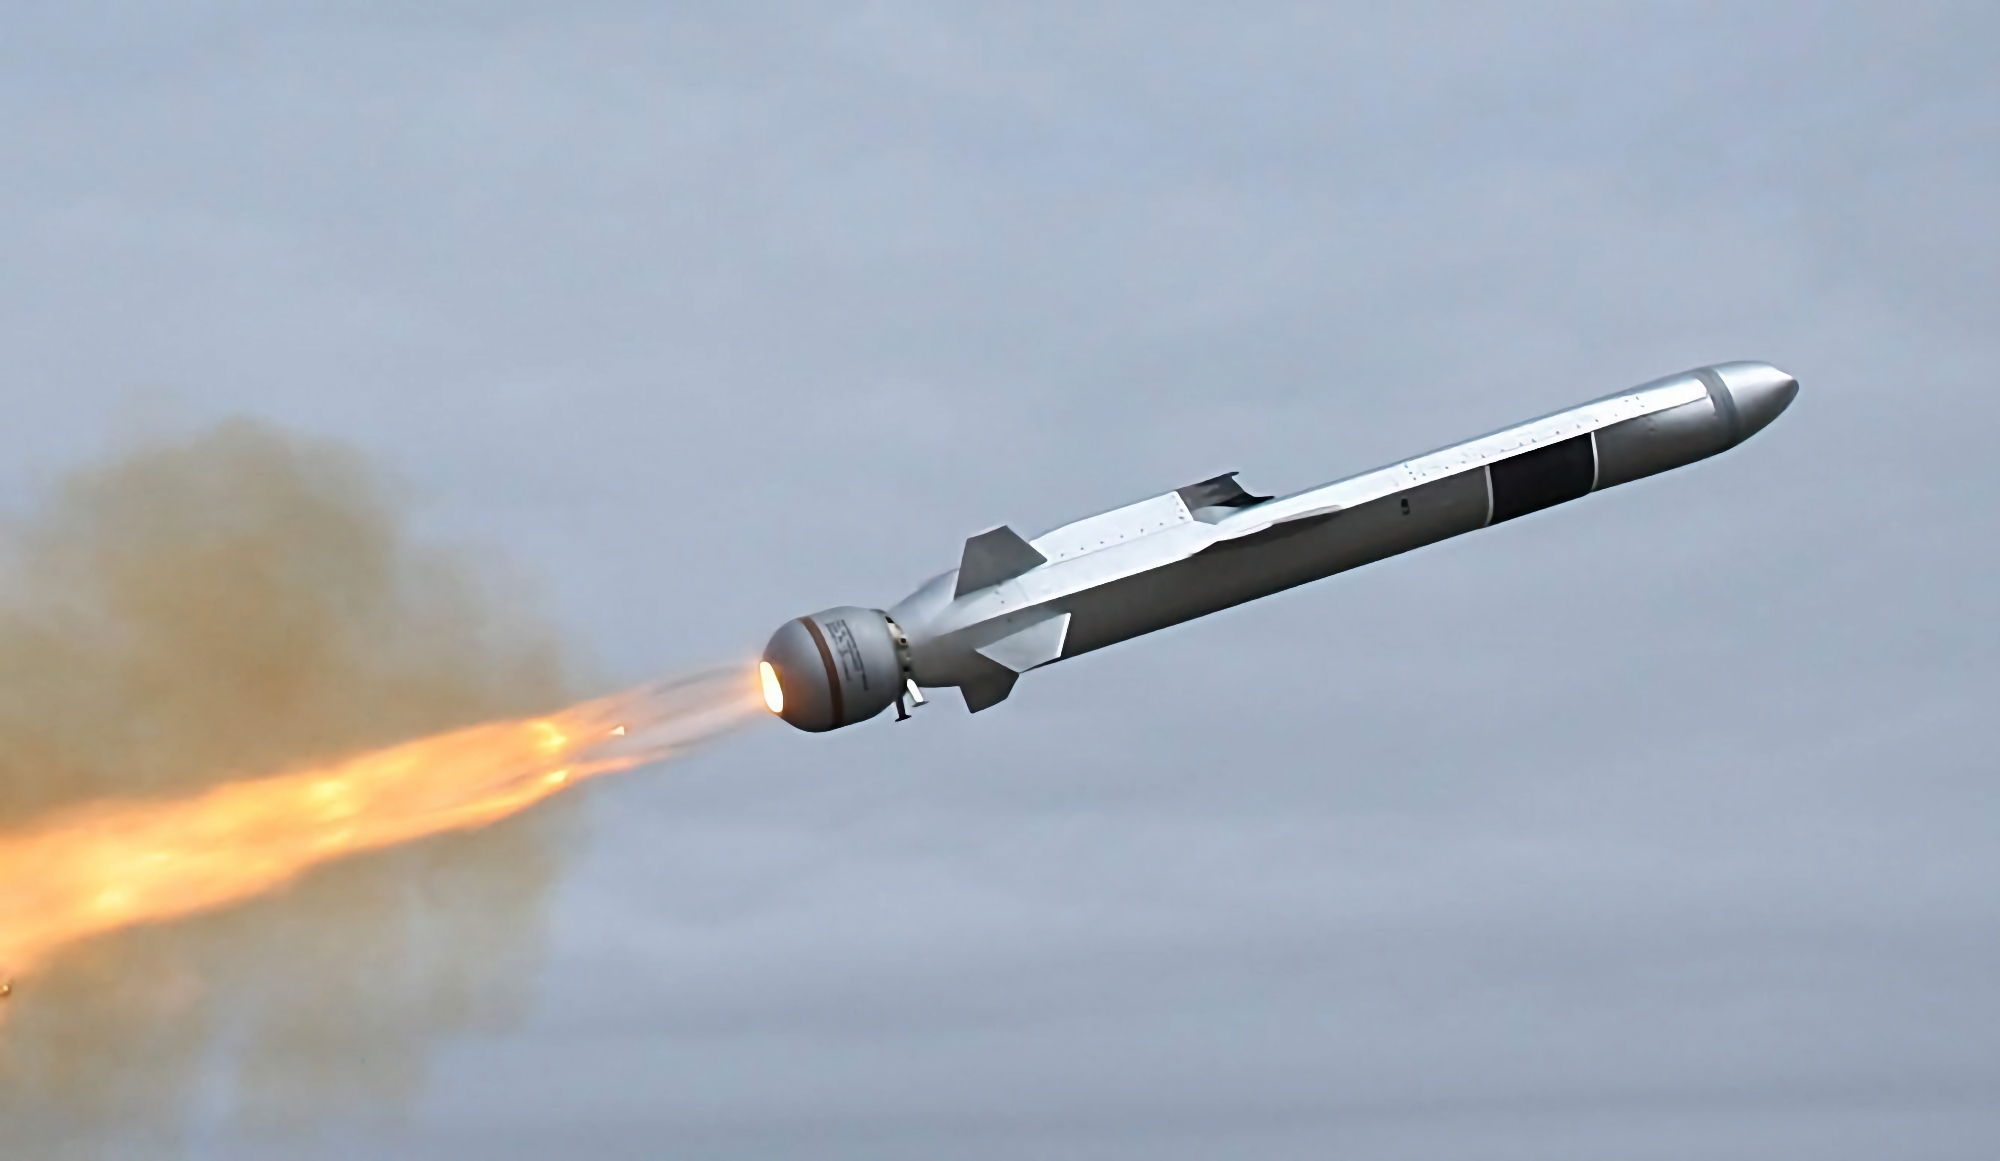 Latvia is going to buy Norwegian NSM anti-ship missiles with a range of 185 km